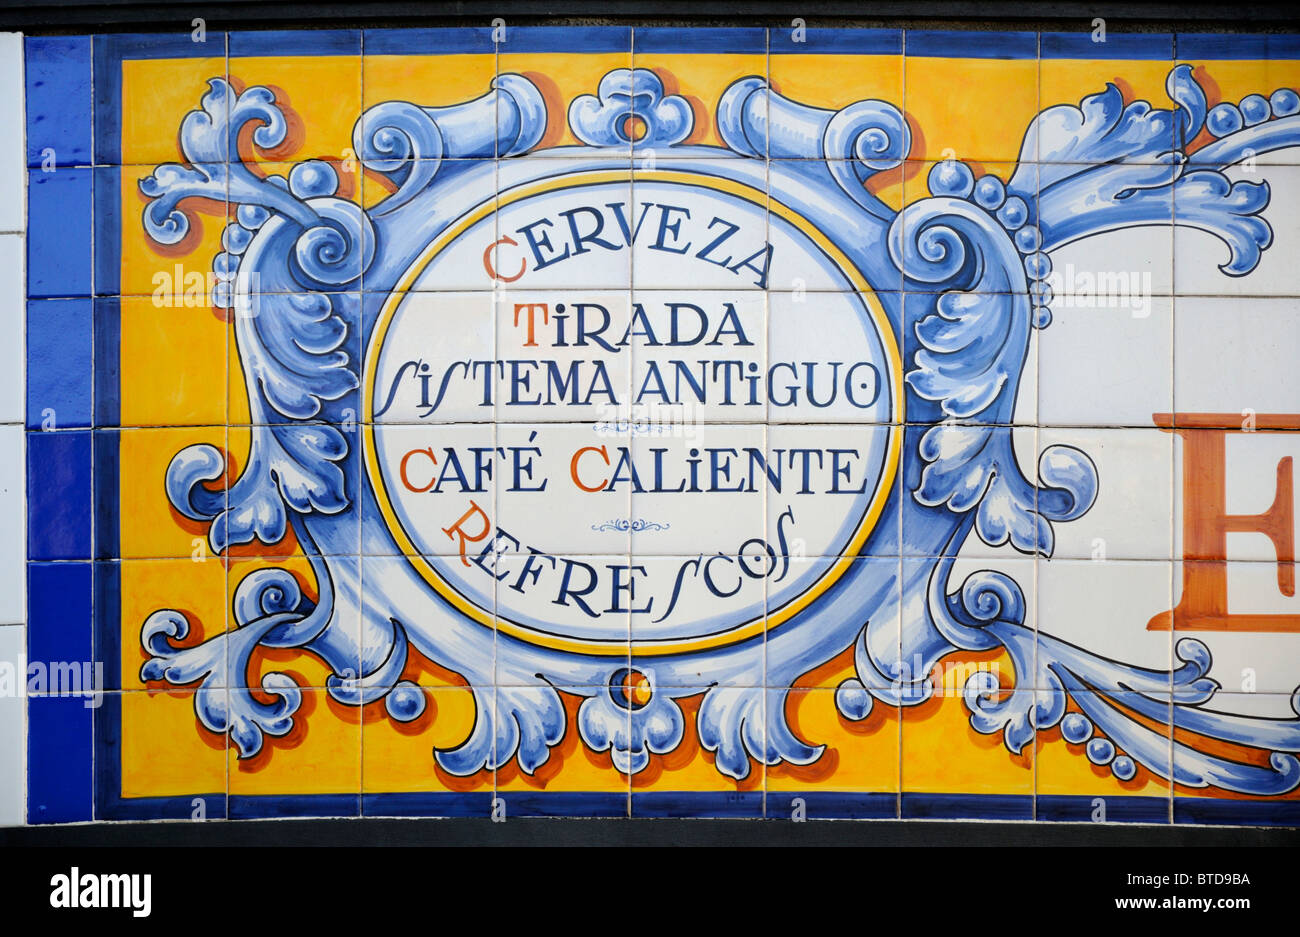 Madrid, Spain. Painted tiled cafe sign advertising beeron draught, hot coffee, refreshments Stock Photo